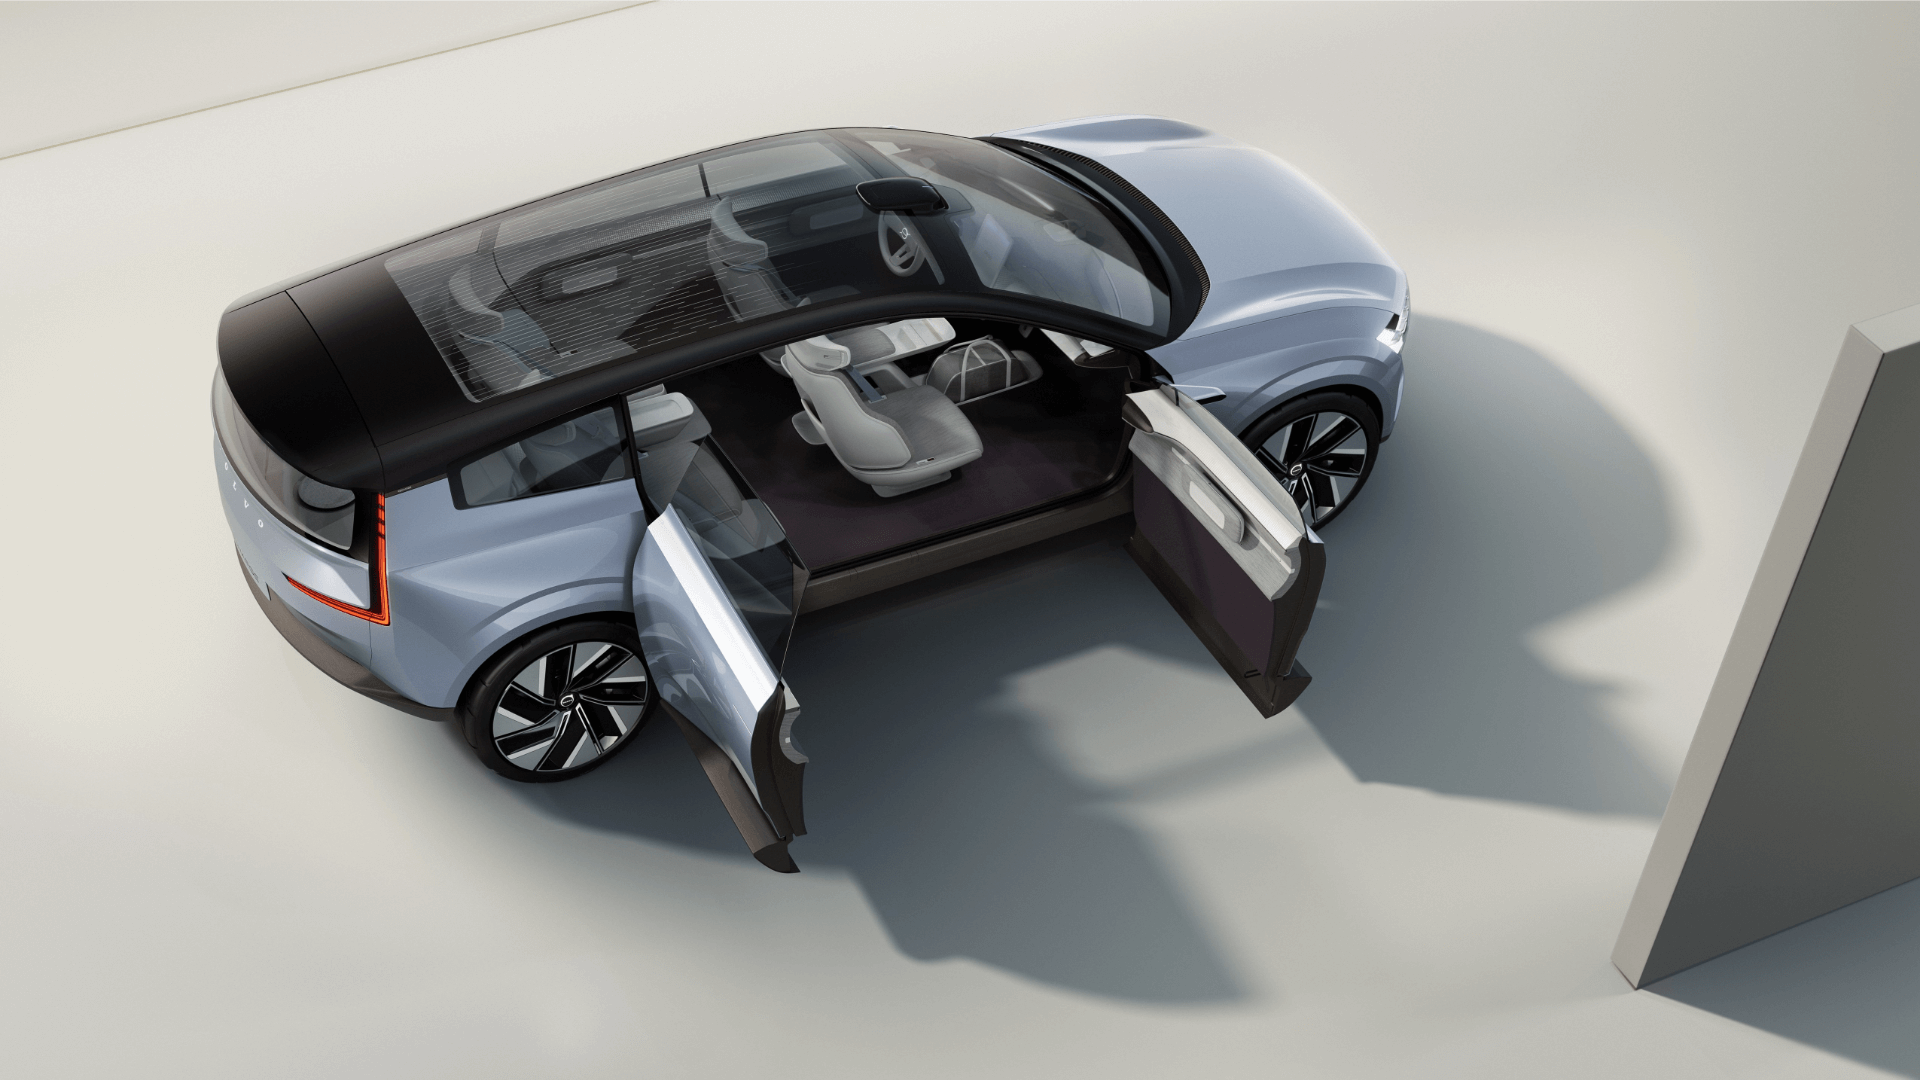 The Volvo Concept Recharge